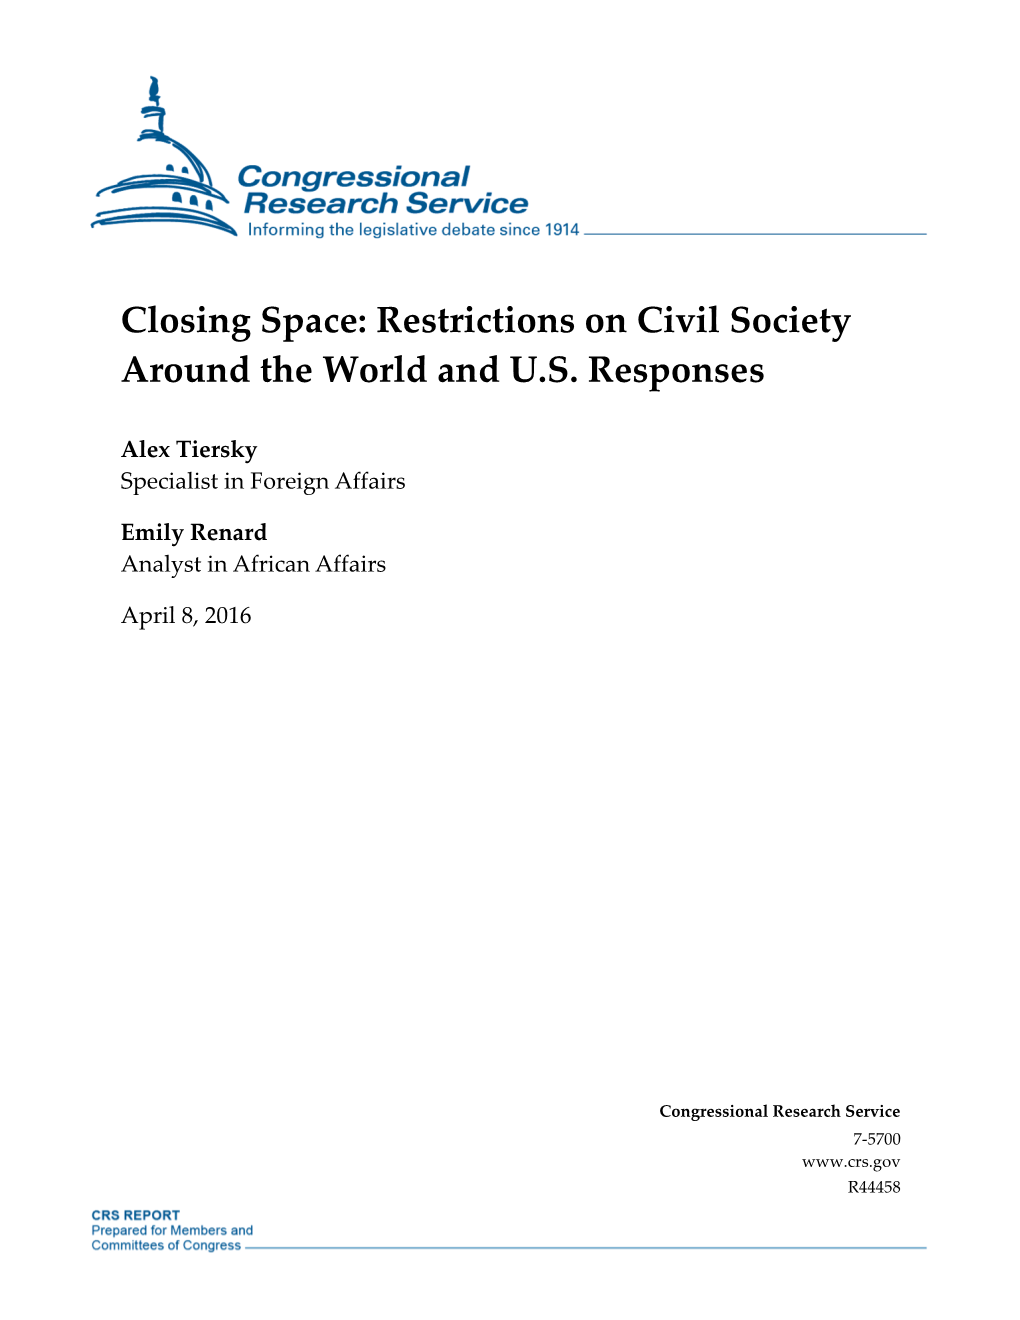 Closing Space: Restrictions on Civil Society Around the World and U.S. Responses